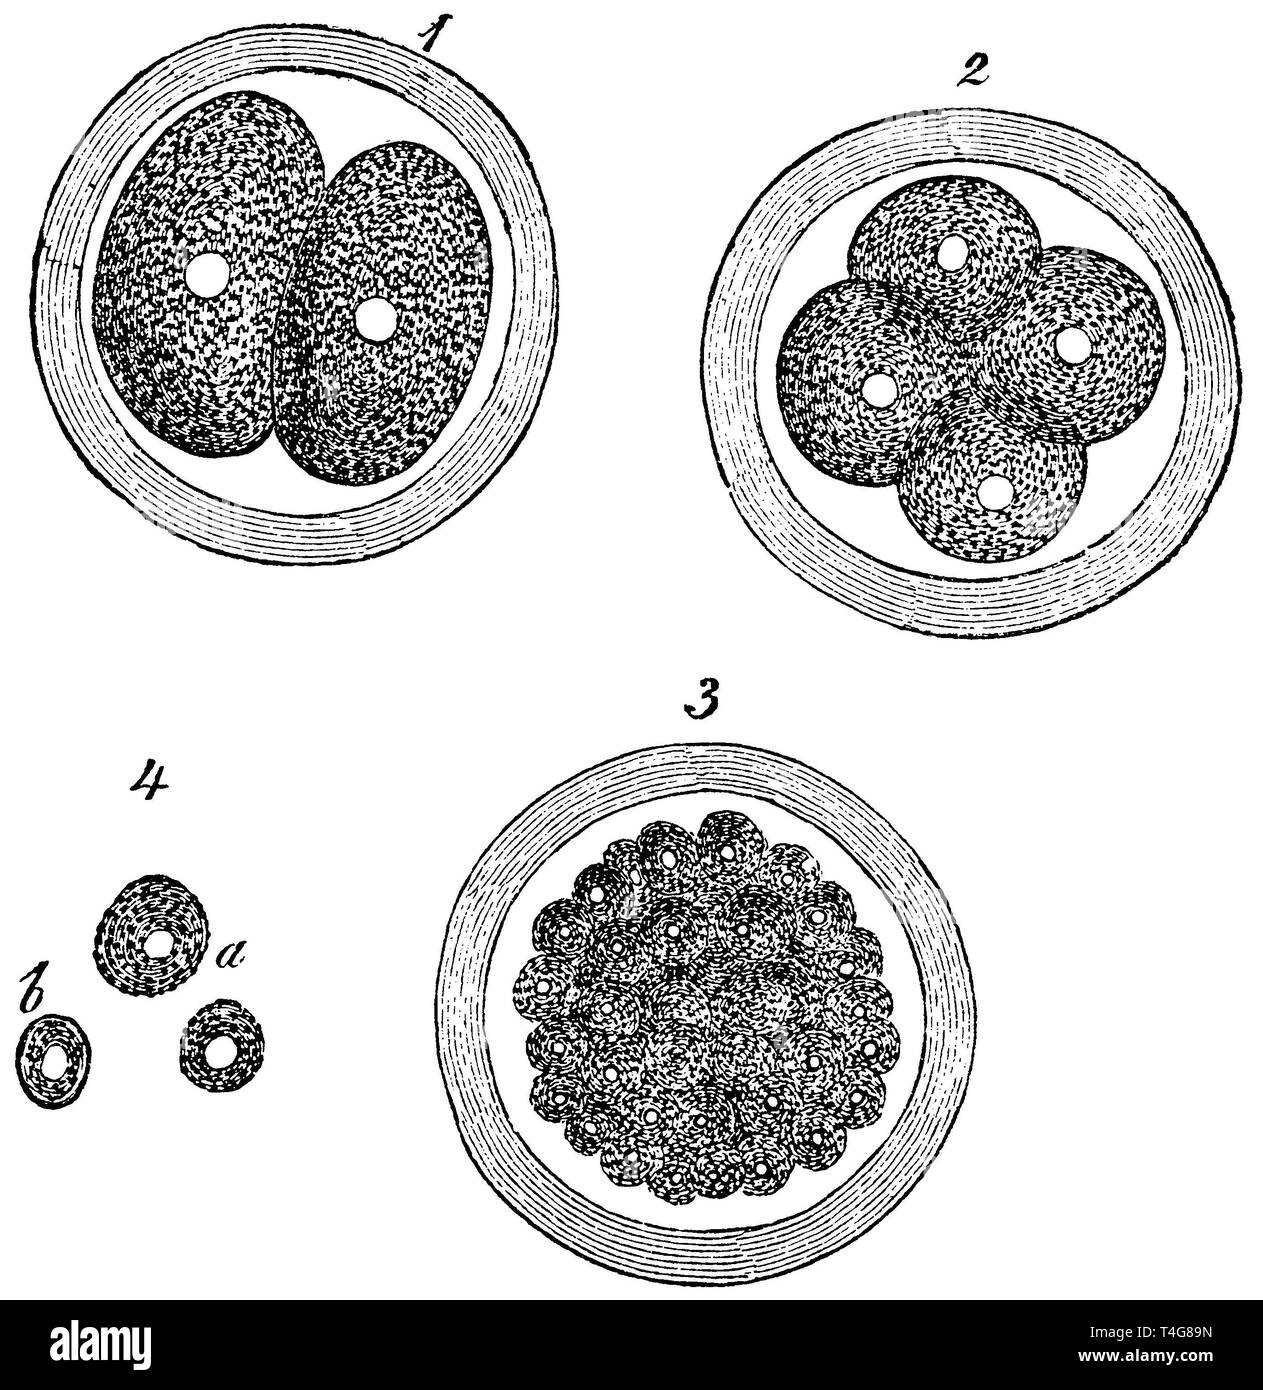 Division of the mammalian cell. 1) yolk mass in 2 cells, 2) yolk mass in 4 cells disintegrate with nuclei, 3) large mass by furrowed cells, 4) a, b single cells with nuclei, anonym  1887 Stock Photo